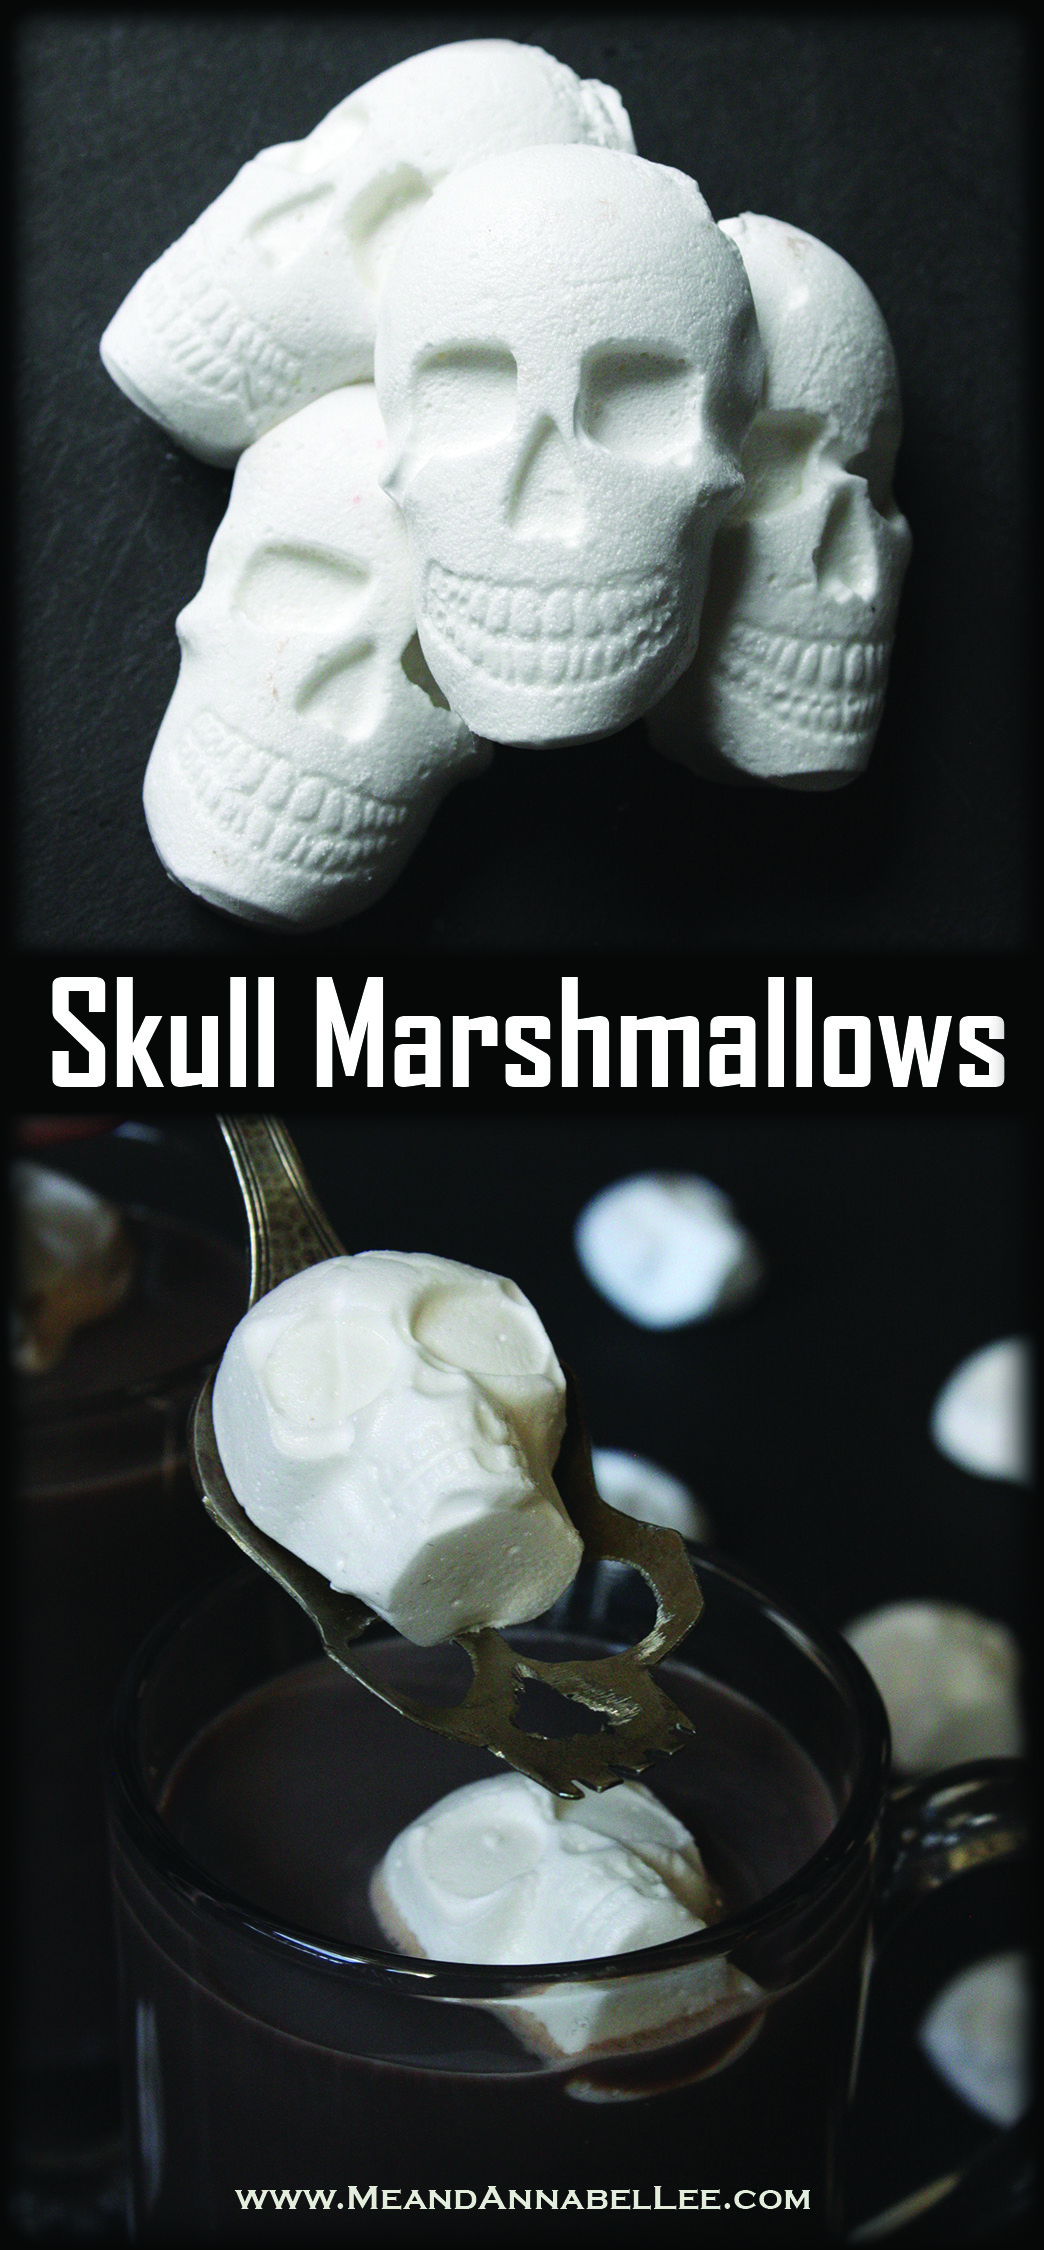 Homemade Skull Marshmallows | Best Hot Cocoa Recipe | Hot Chocolate | Dessert Drinks | Halloween Treats | Hot Beverage | Gothic Peeps | Silicone Skull Molds | Cold Weather Comfort Food | Skull Spoon | www.MeandAnnabelLee.com